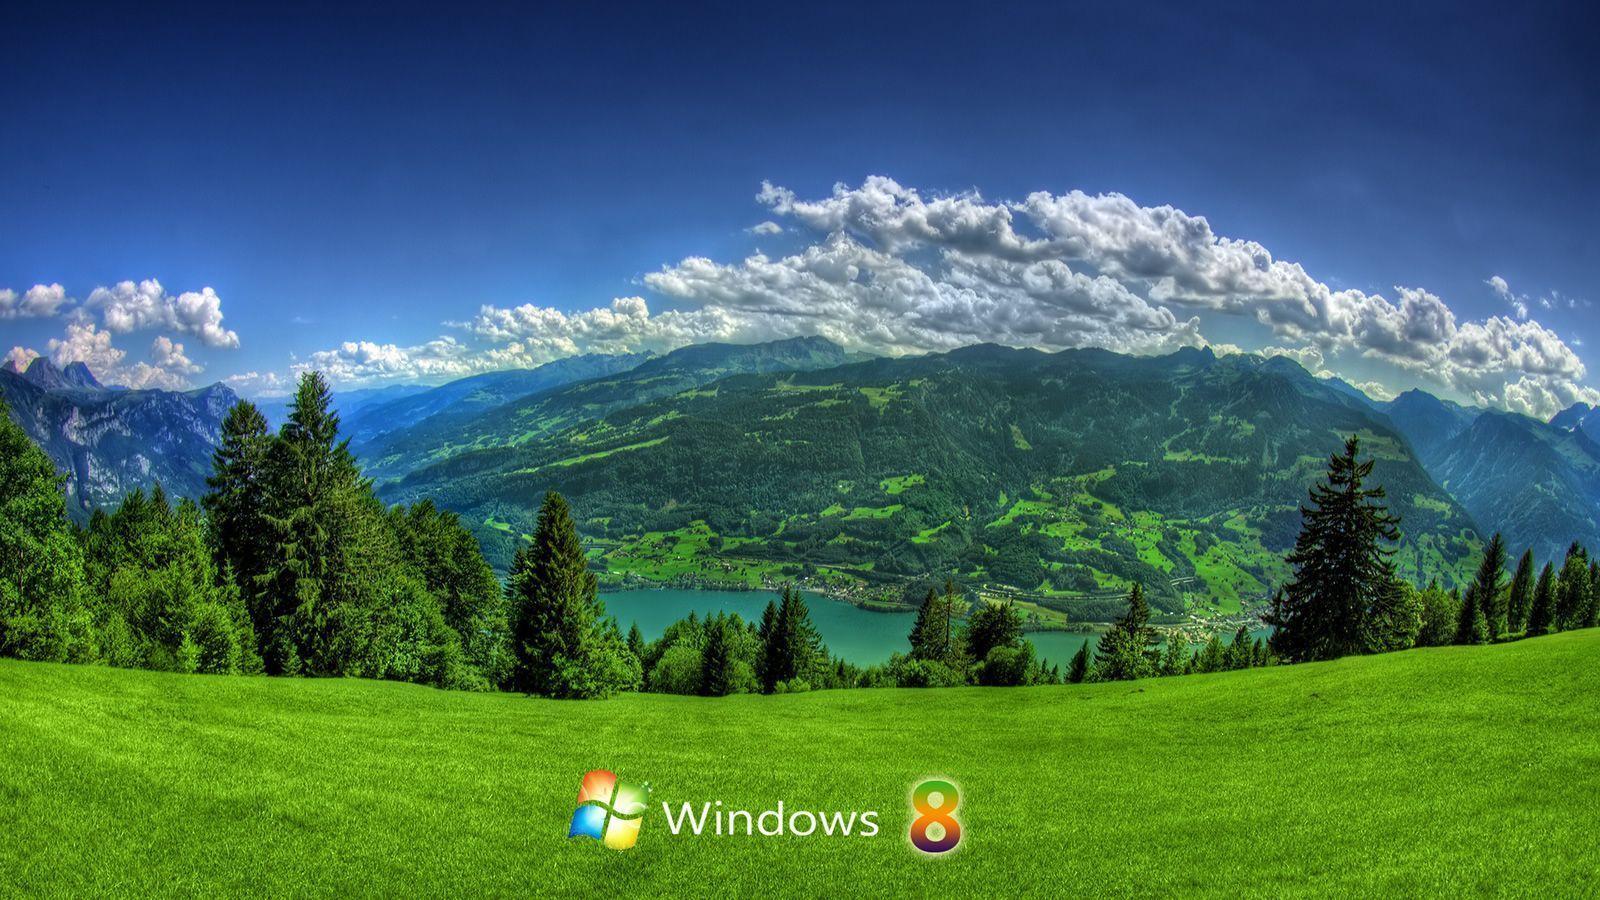 Image For > Wallpapers Windows 8 3d